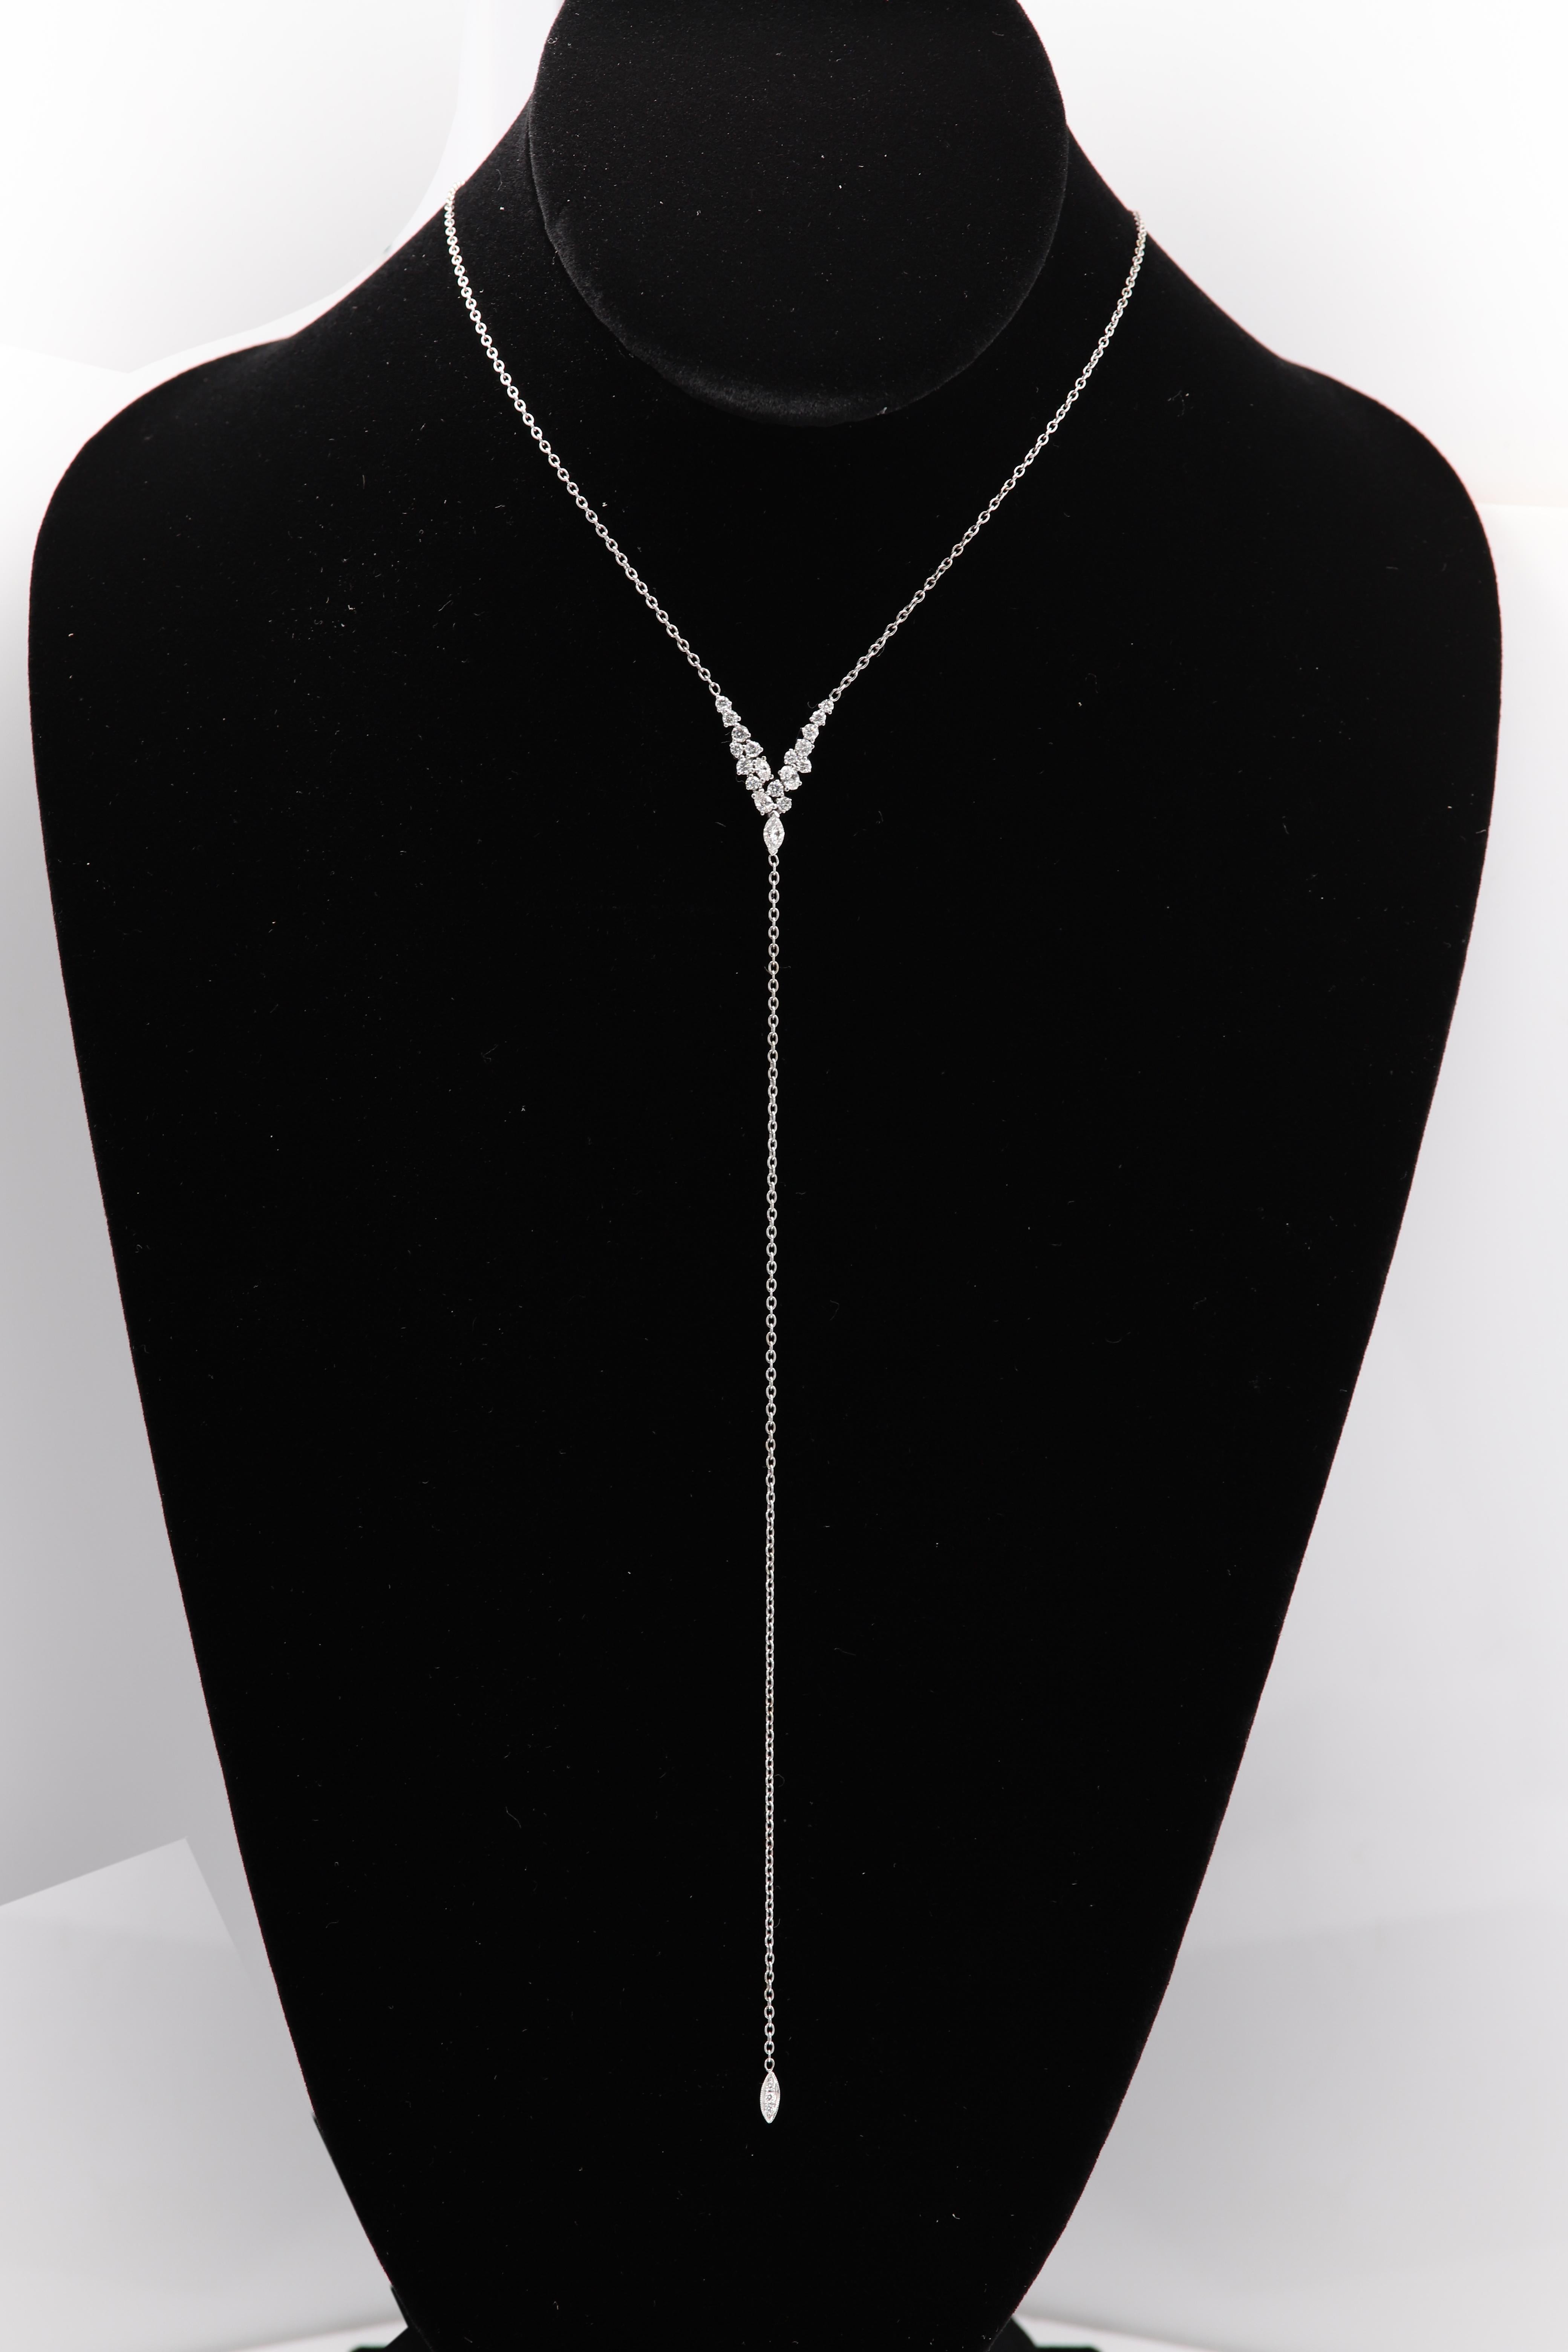 Diamond Tassel Necklace
18k White Gold 6.0 grams
center has cluster of diamonds - mix shapes
total approx 1.0 carat approx G-H-I1-SI
Length of center dangle is approx 7' inch
Overall neck Length - adjustable 16.5' - 17.5' inch
Lobster lock
Gift Box